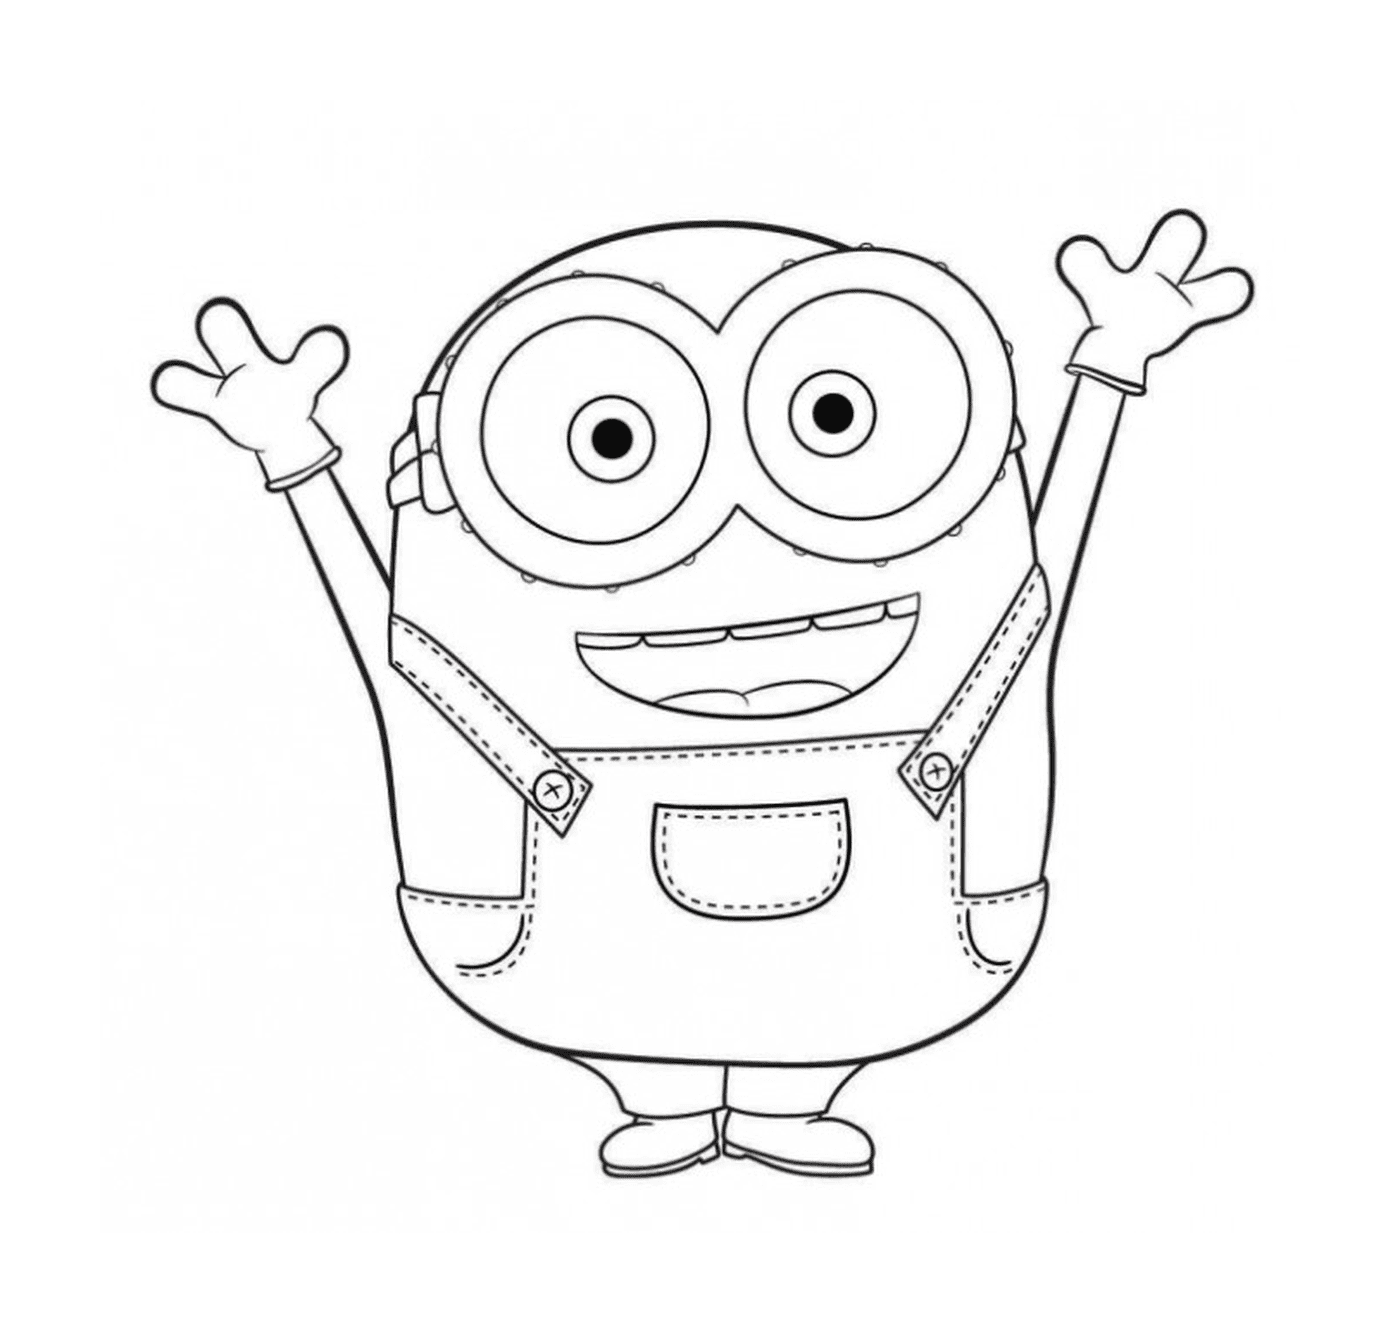  Smile of the Minion, raised hands 